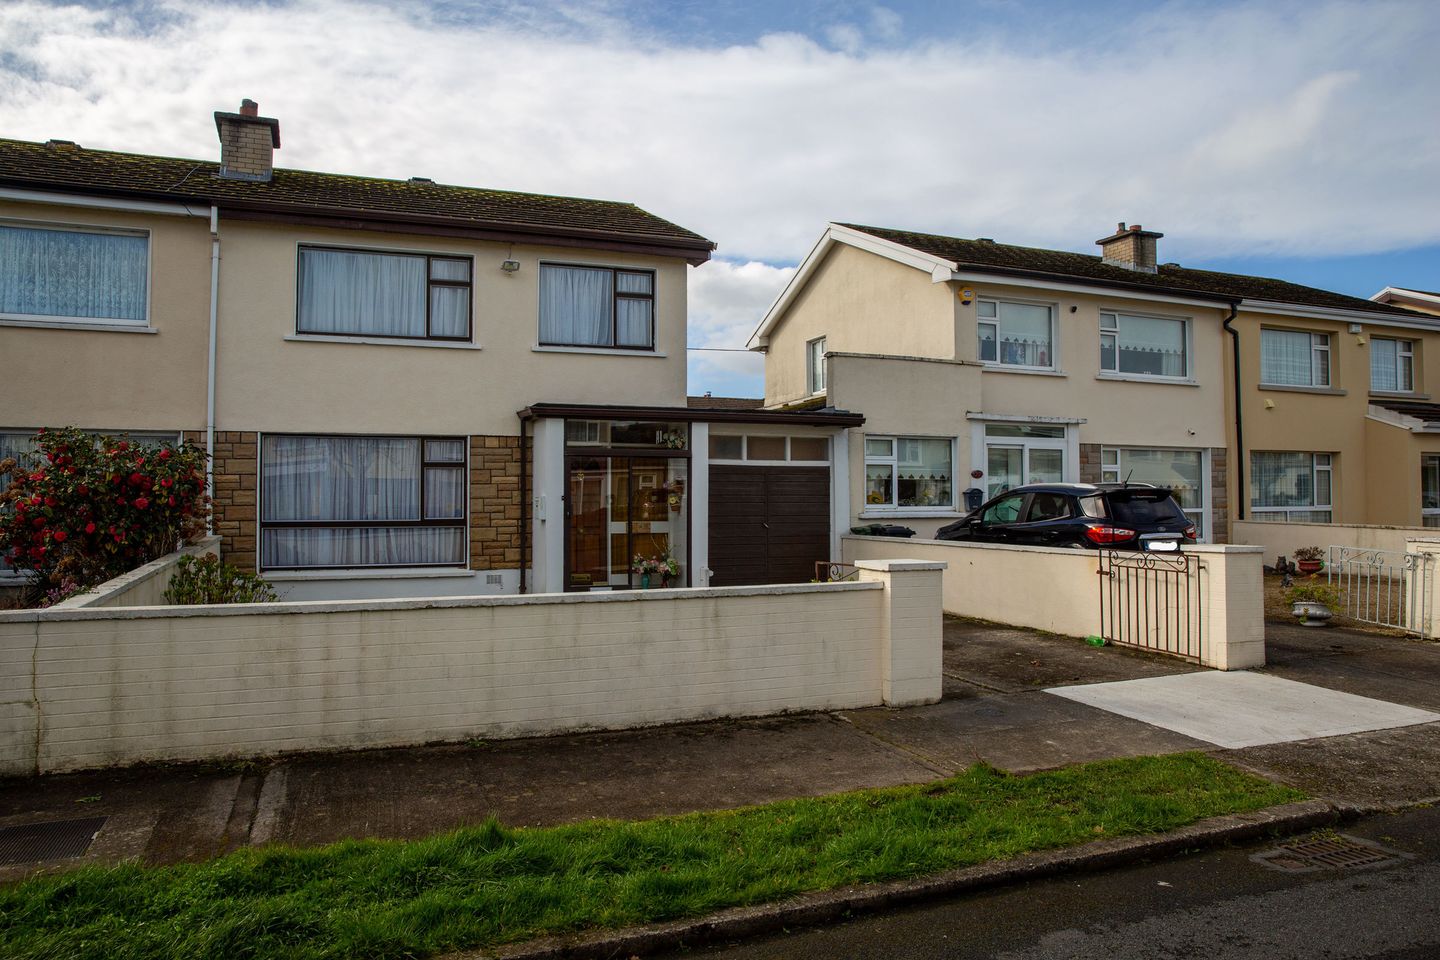 78 Charnwood, Vevay Road, Bray, Co. Wicklow, A98Y563